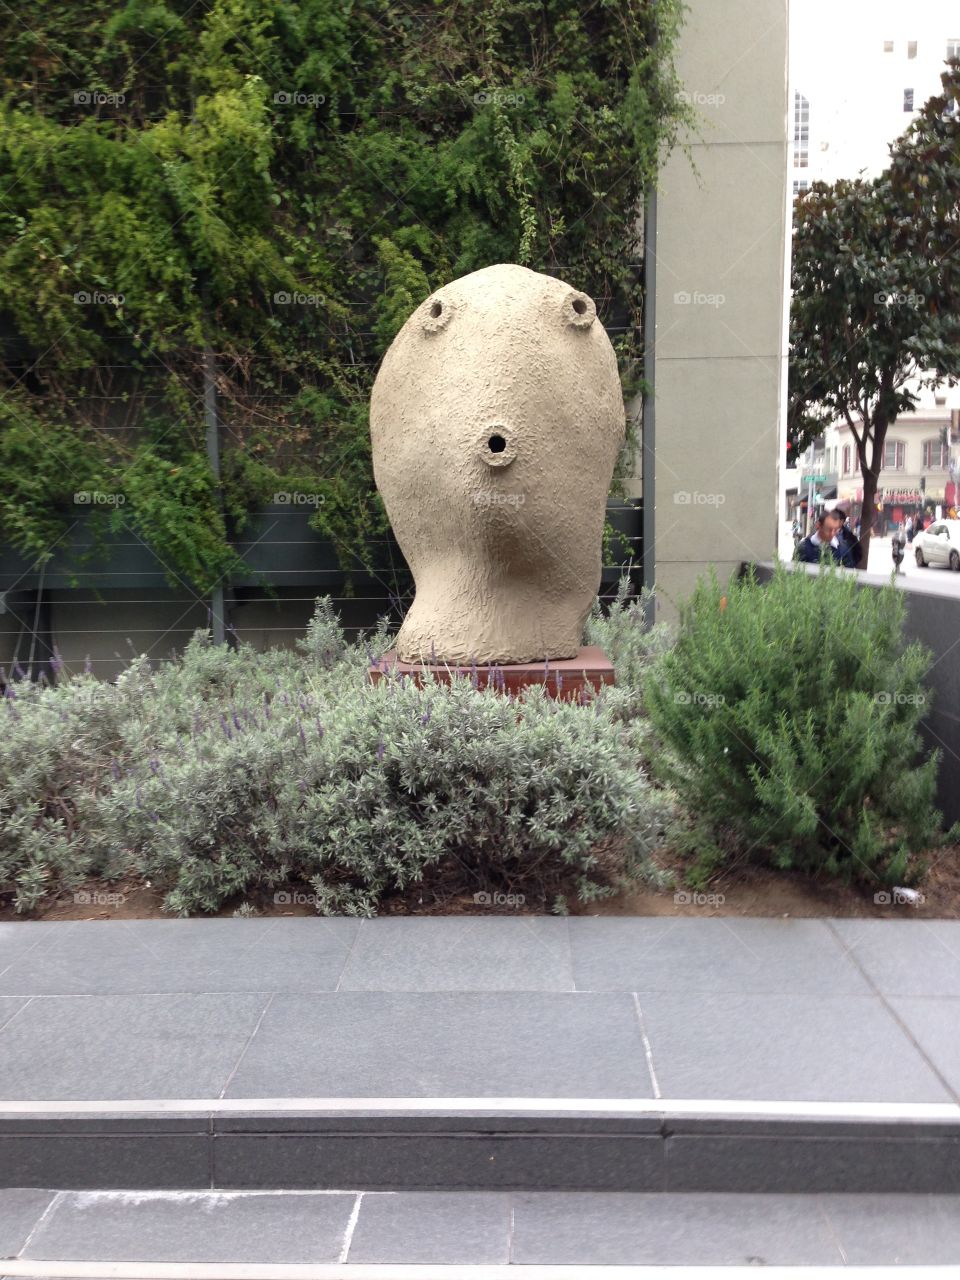 Crazy statue in downtown San Francisco